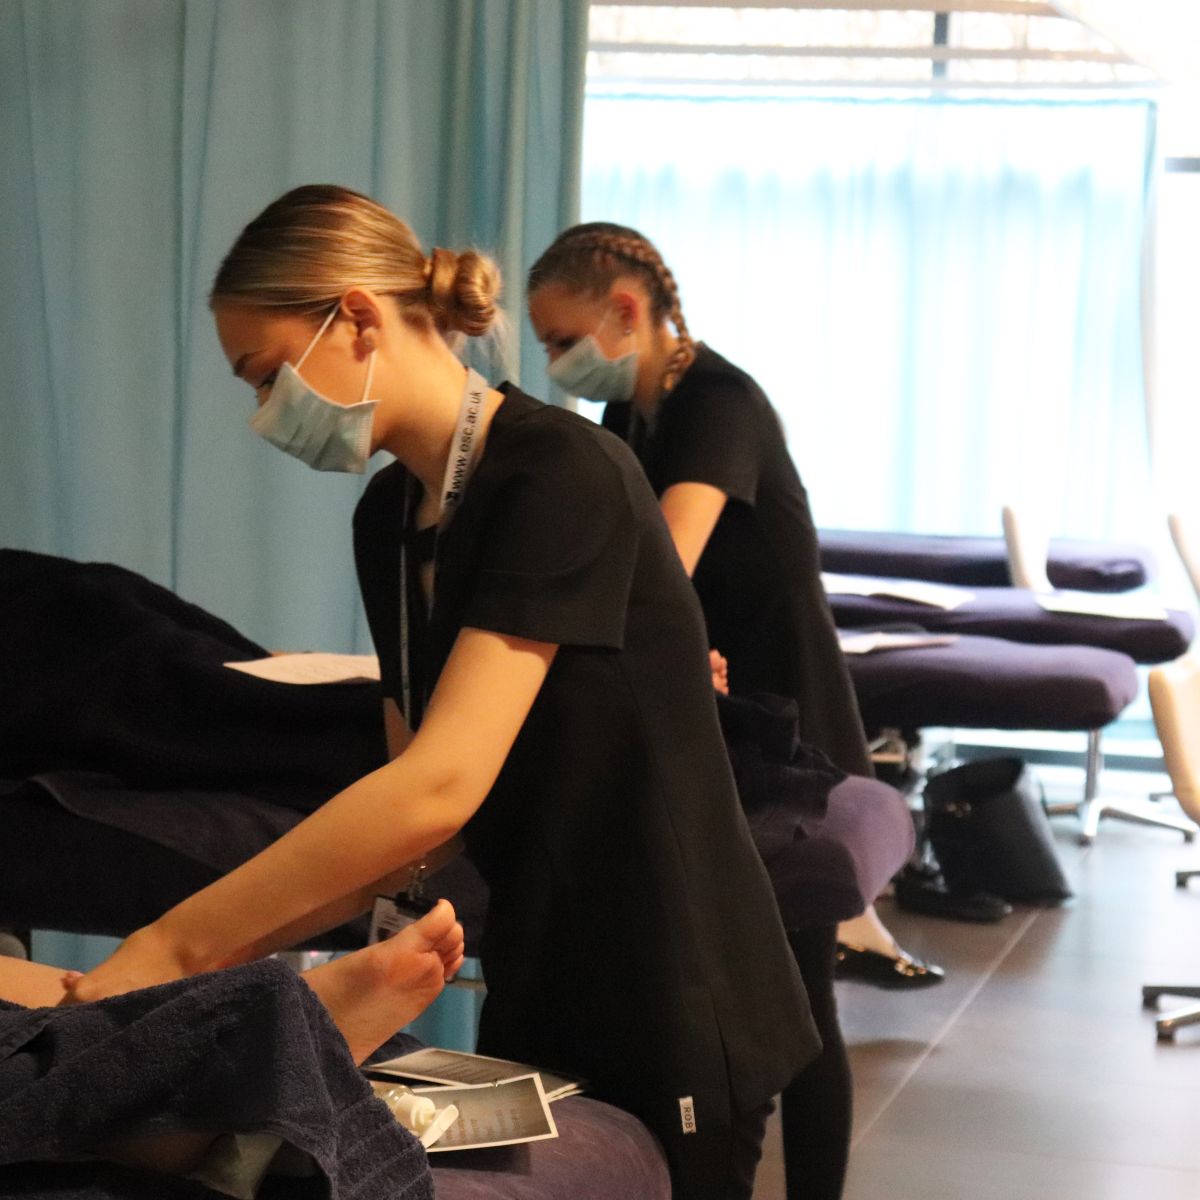 Beauty Therapy Students at East Surrey College Provide Massages for NHS Staff.